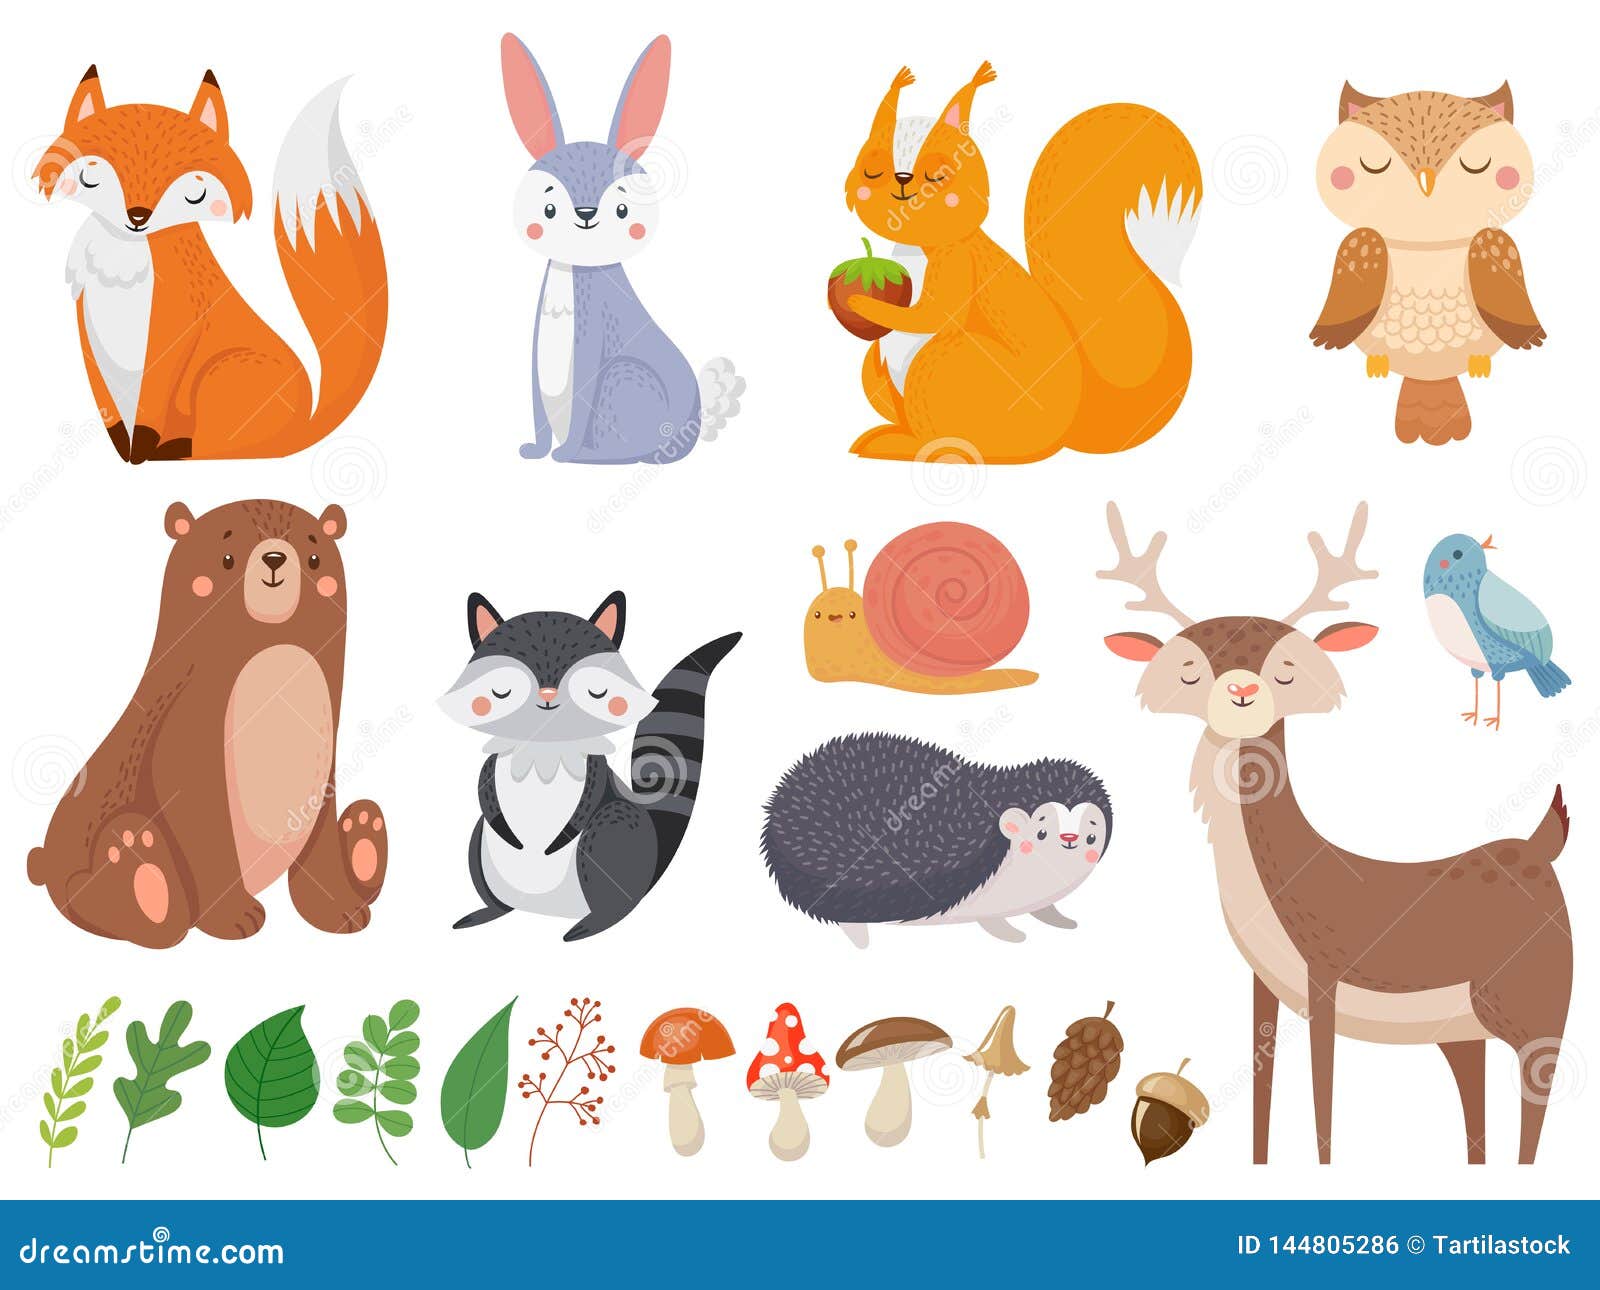 Cute Woodland Animals. Wild Animal, Forest Flora and Fauna Elements ...